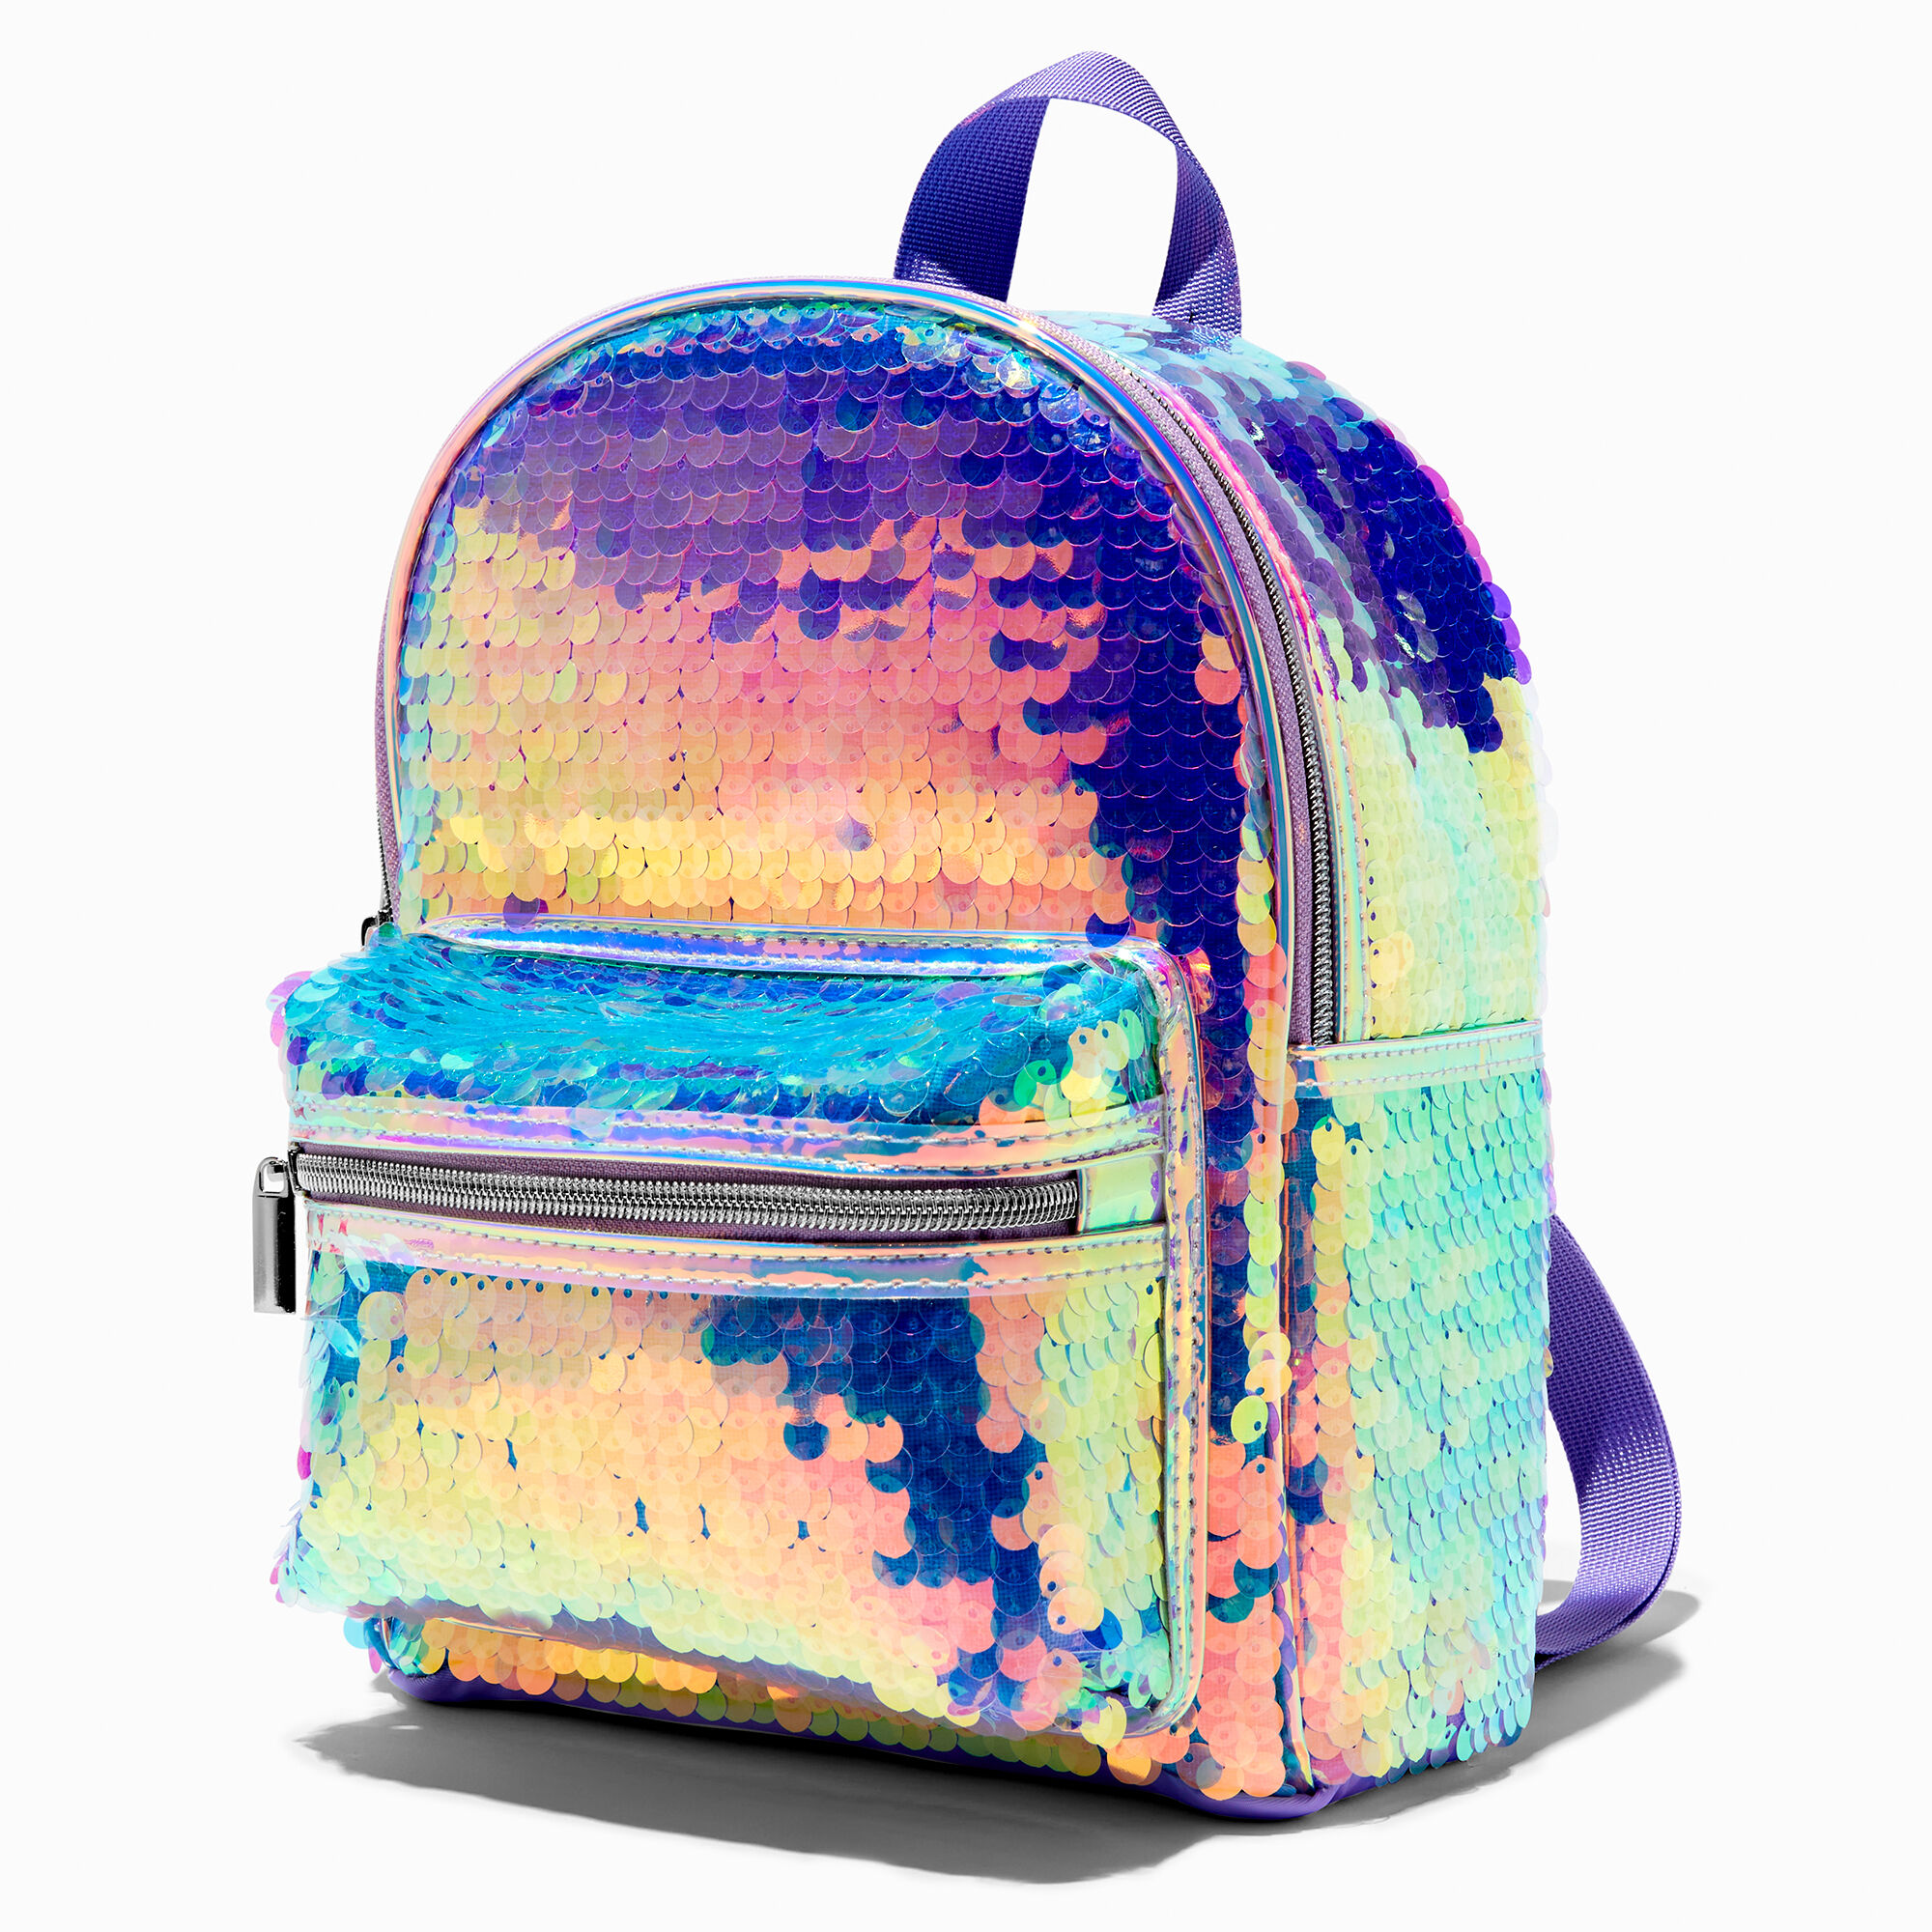 View Claires Sequin Mini Backpack Rainbow information